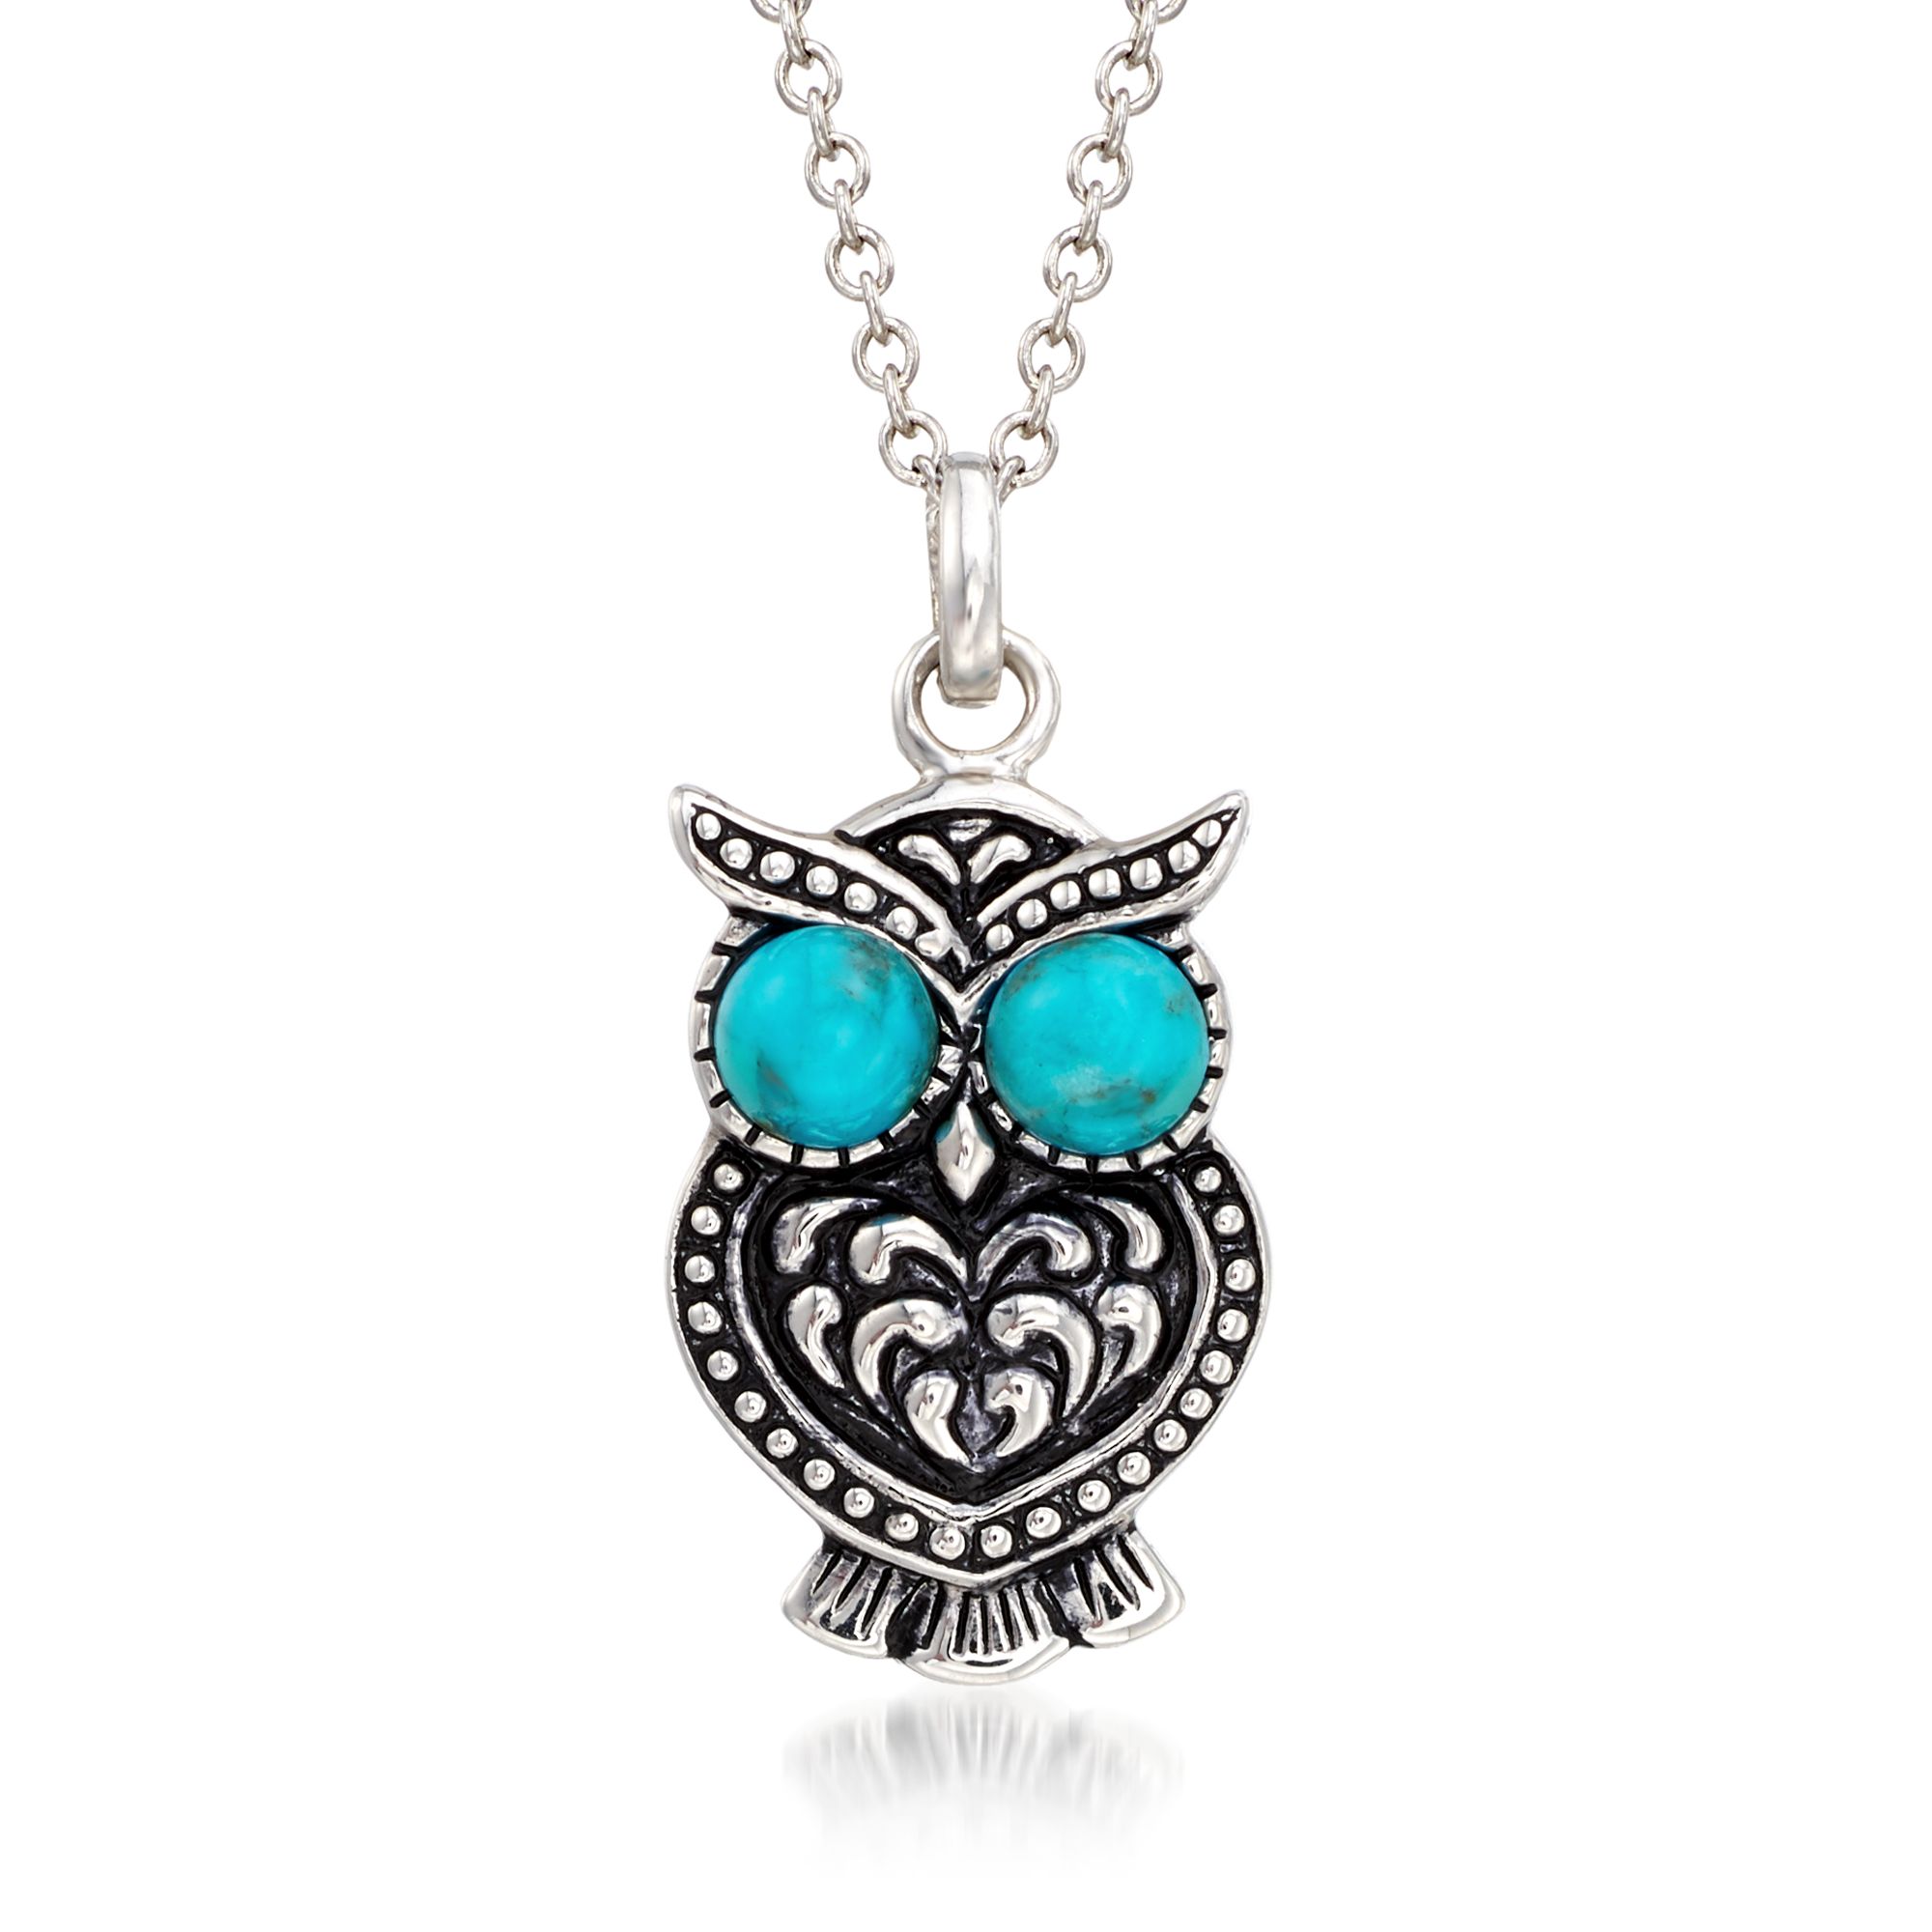 Ross-Simons Sterling Silver Owl Pendant With Black Onyx